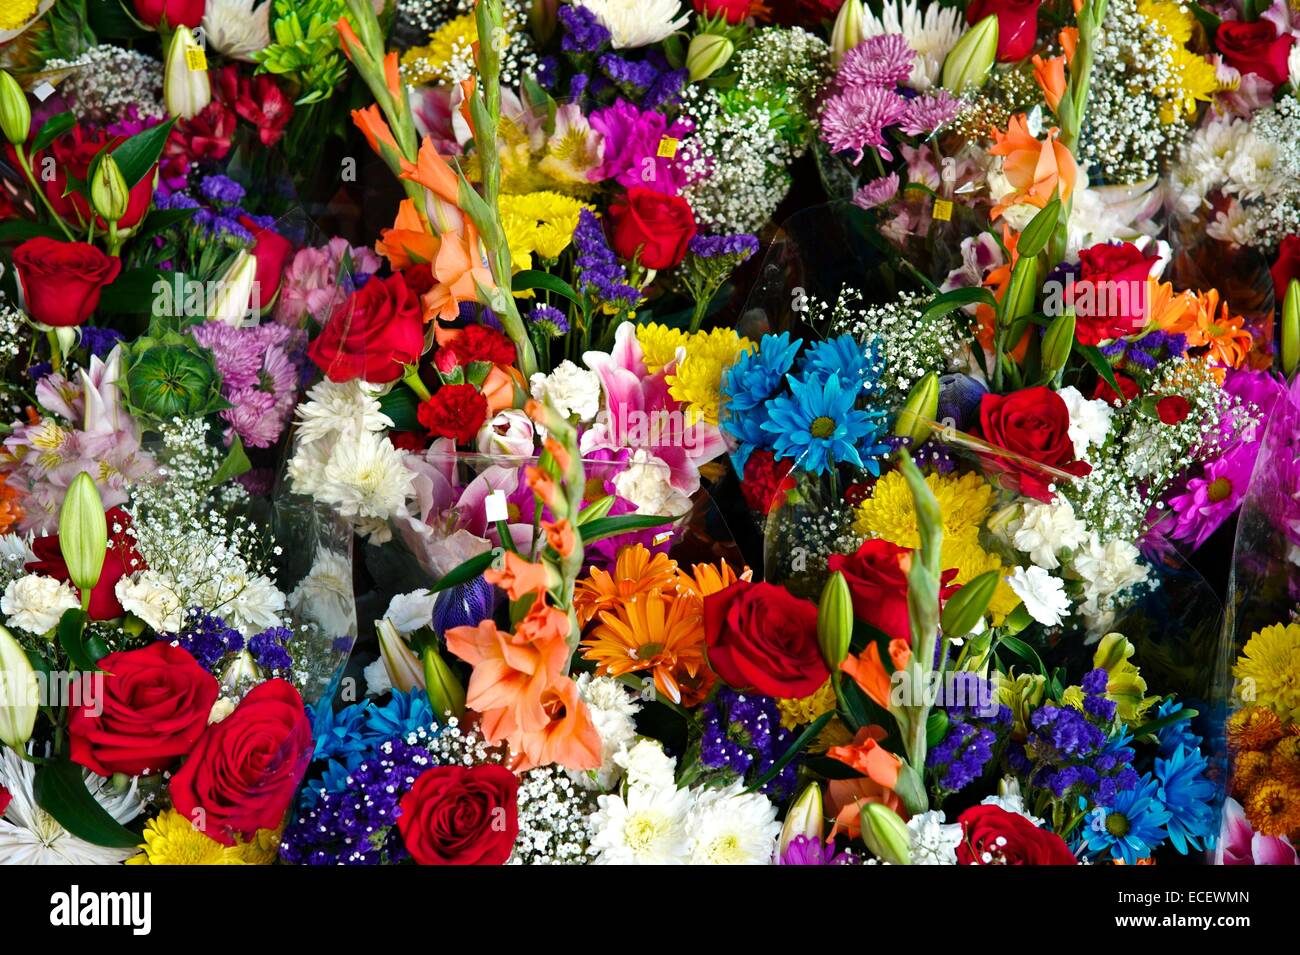 Colorful flowers in a New York street stand Stock Photo